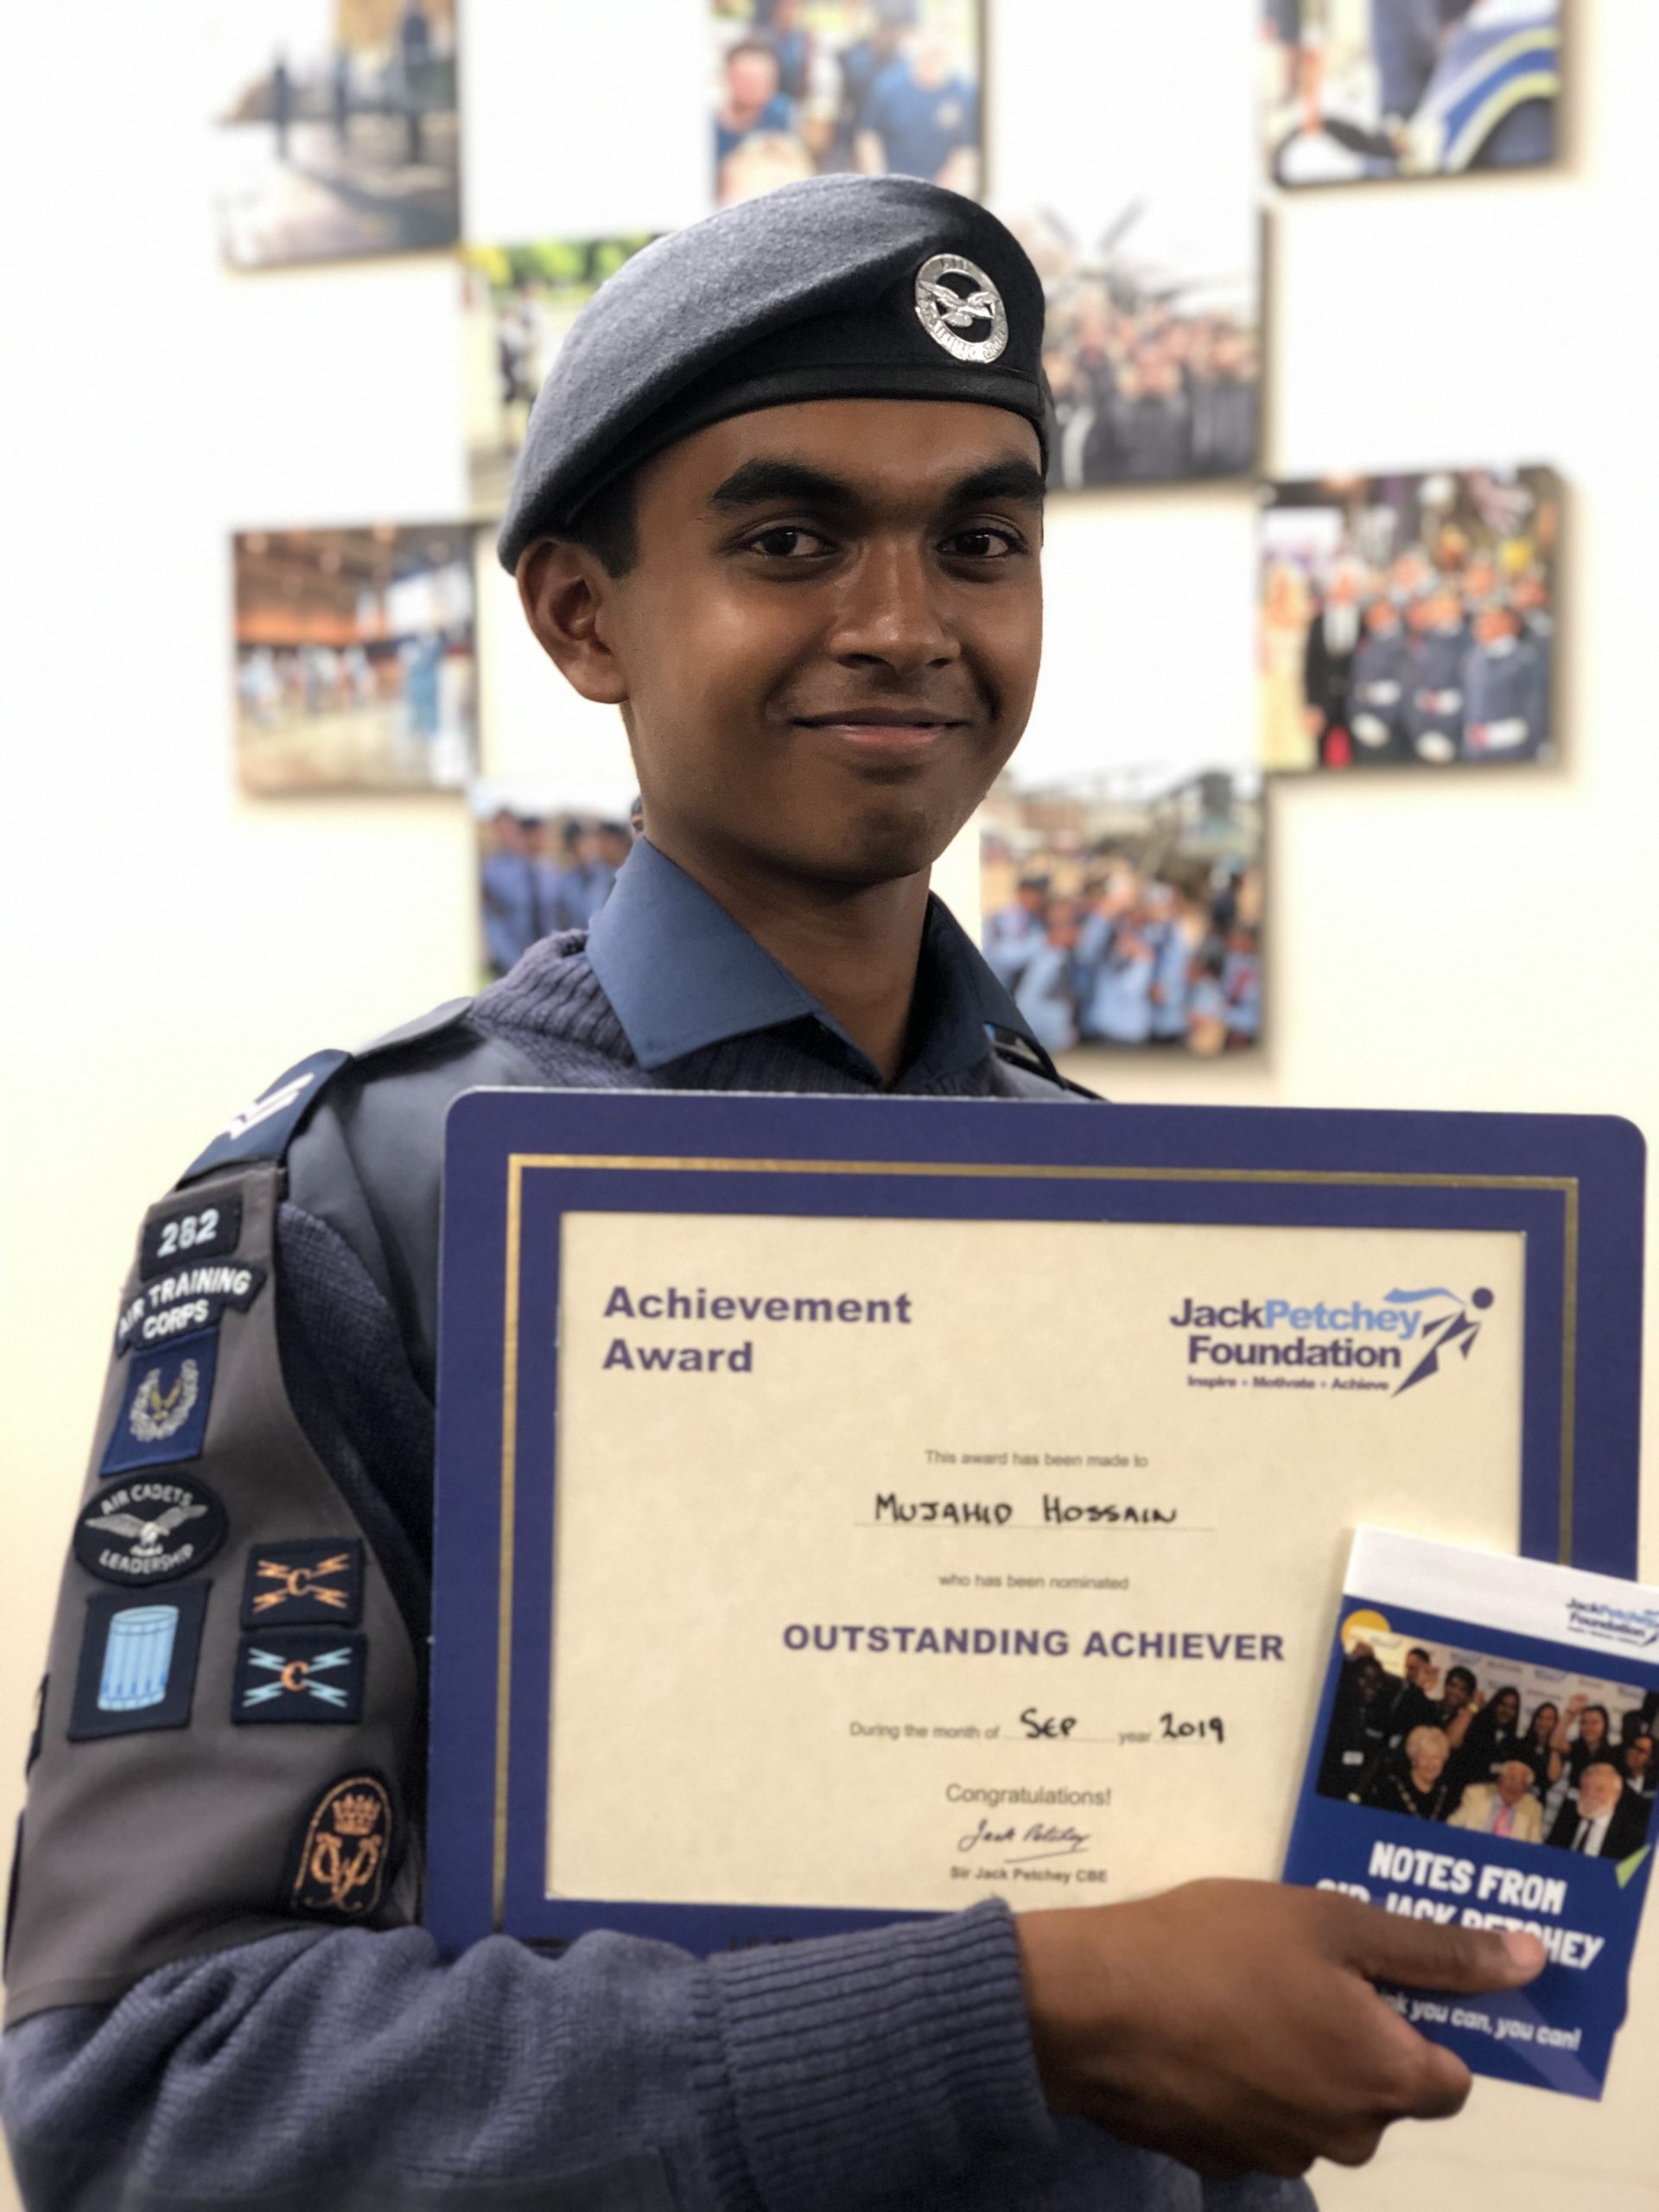 Air Cadets London Wing Achievement Award Event!